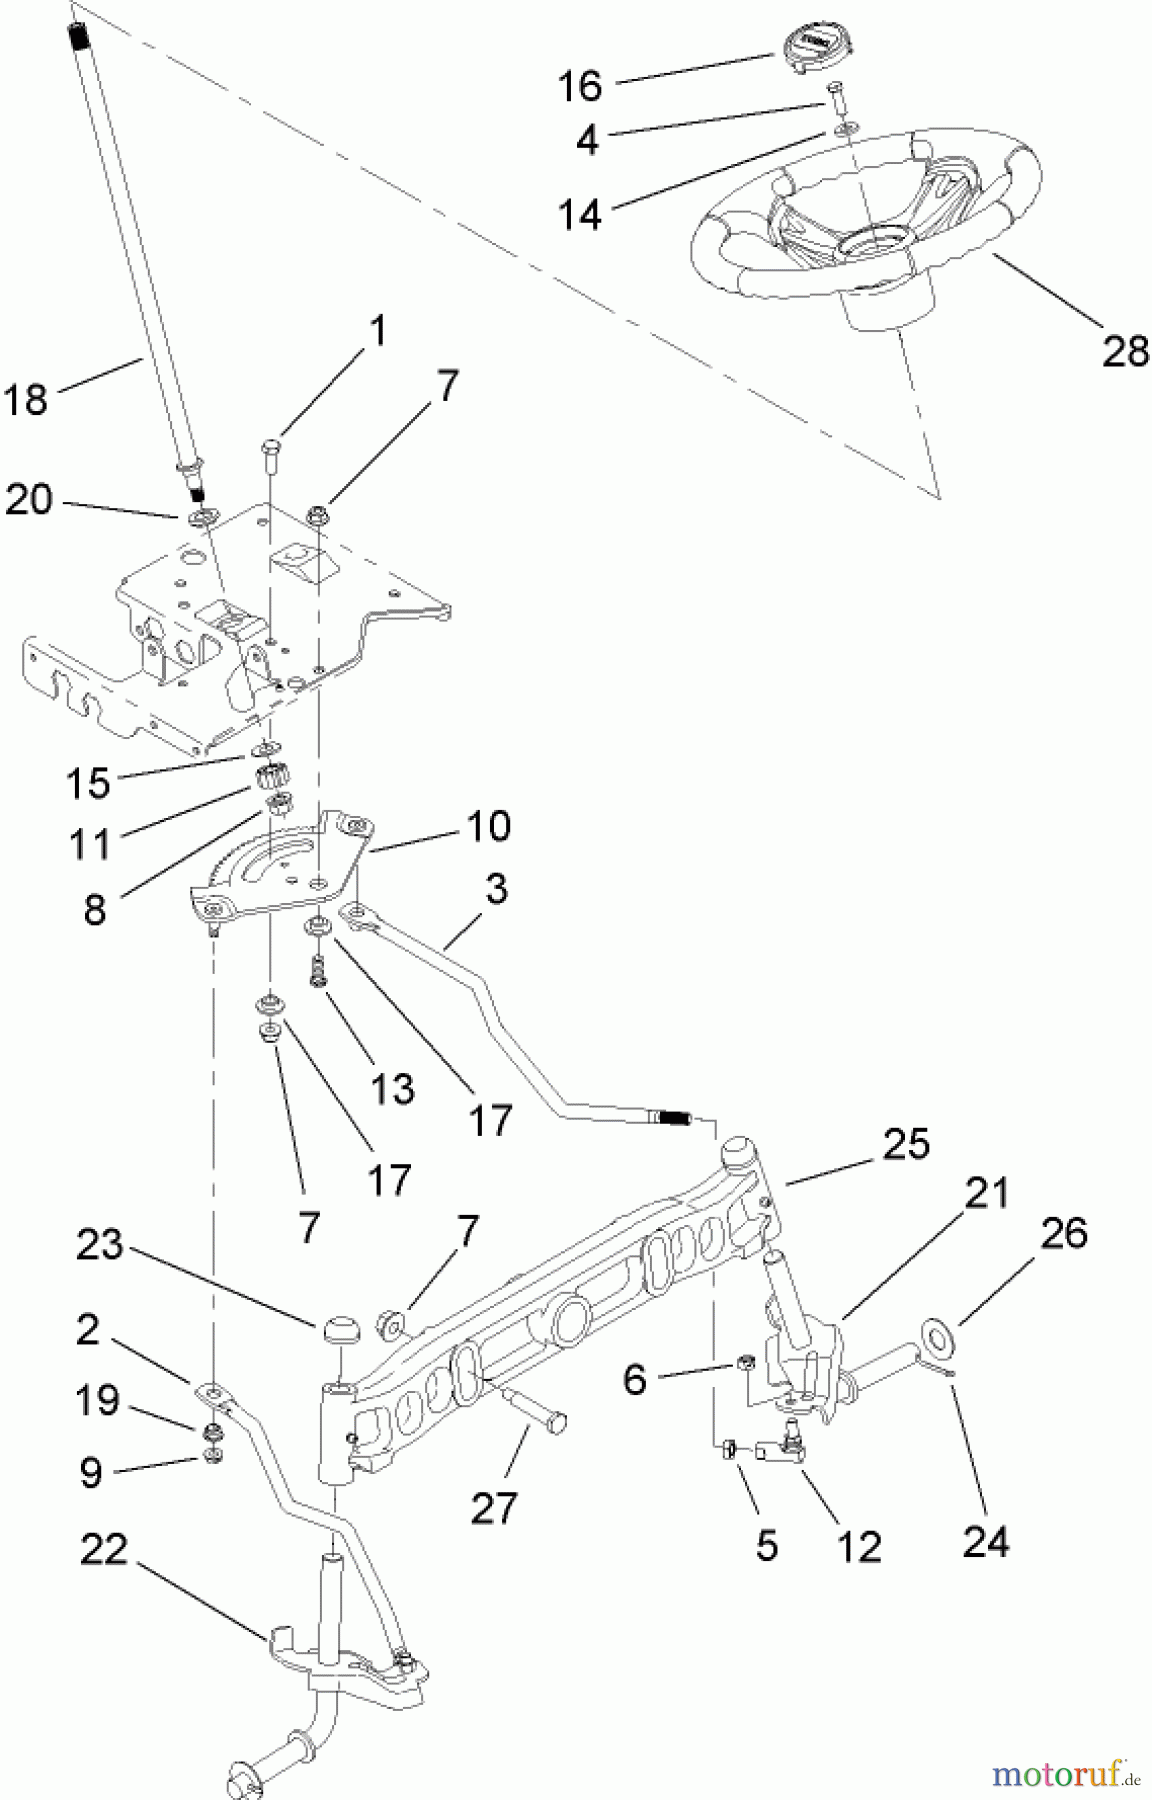  Toro Neu Mowers, Lawn & Garden Tractor Seite 1 13AP60RP744 (LX500) - Toro LX500 Lawn Tractor, 2006 (1A096B50000-) STEERING SHAFT AND FRONT AXLE ASSEMBLY